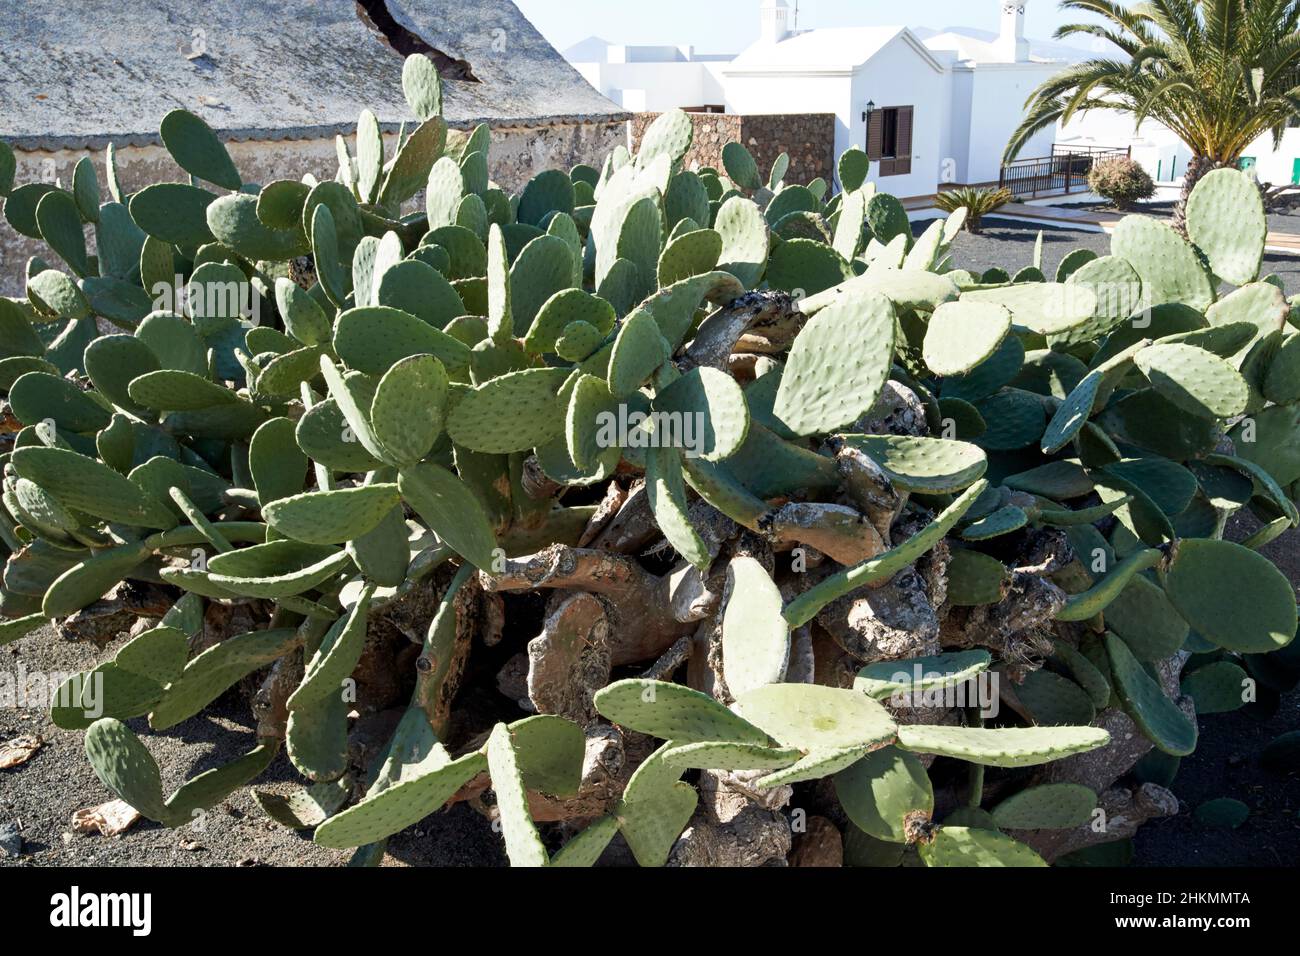 large prickly pear cactus plant growing in a desert garden Teguise Lanzarote Canary Islands Spain Stock Photo